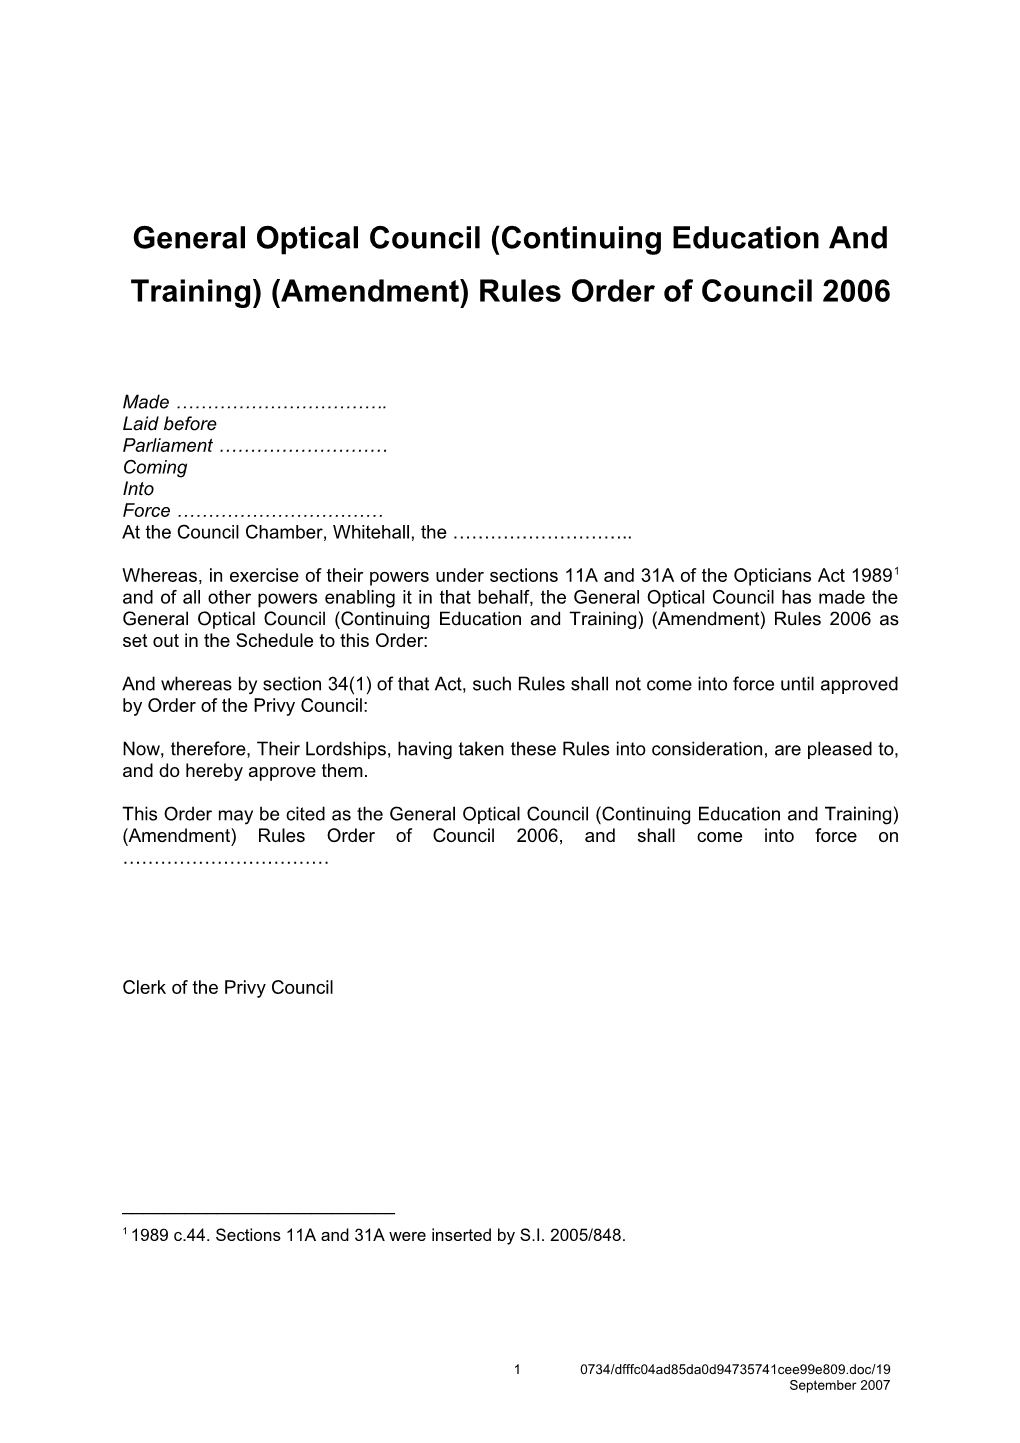 General Optical Council (Continuing Education and Training) (Amendment) Rules Order Of